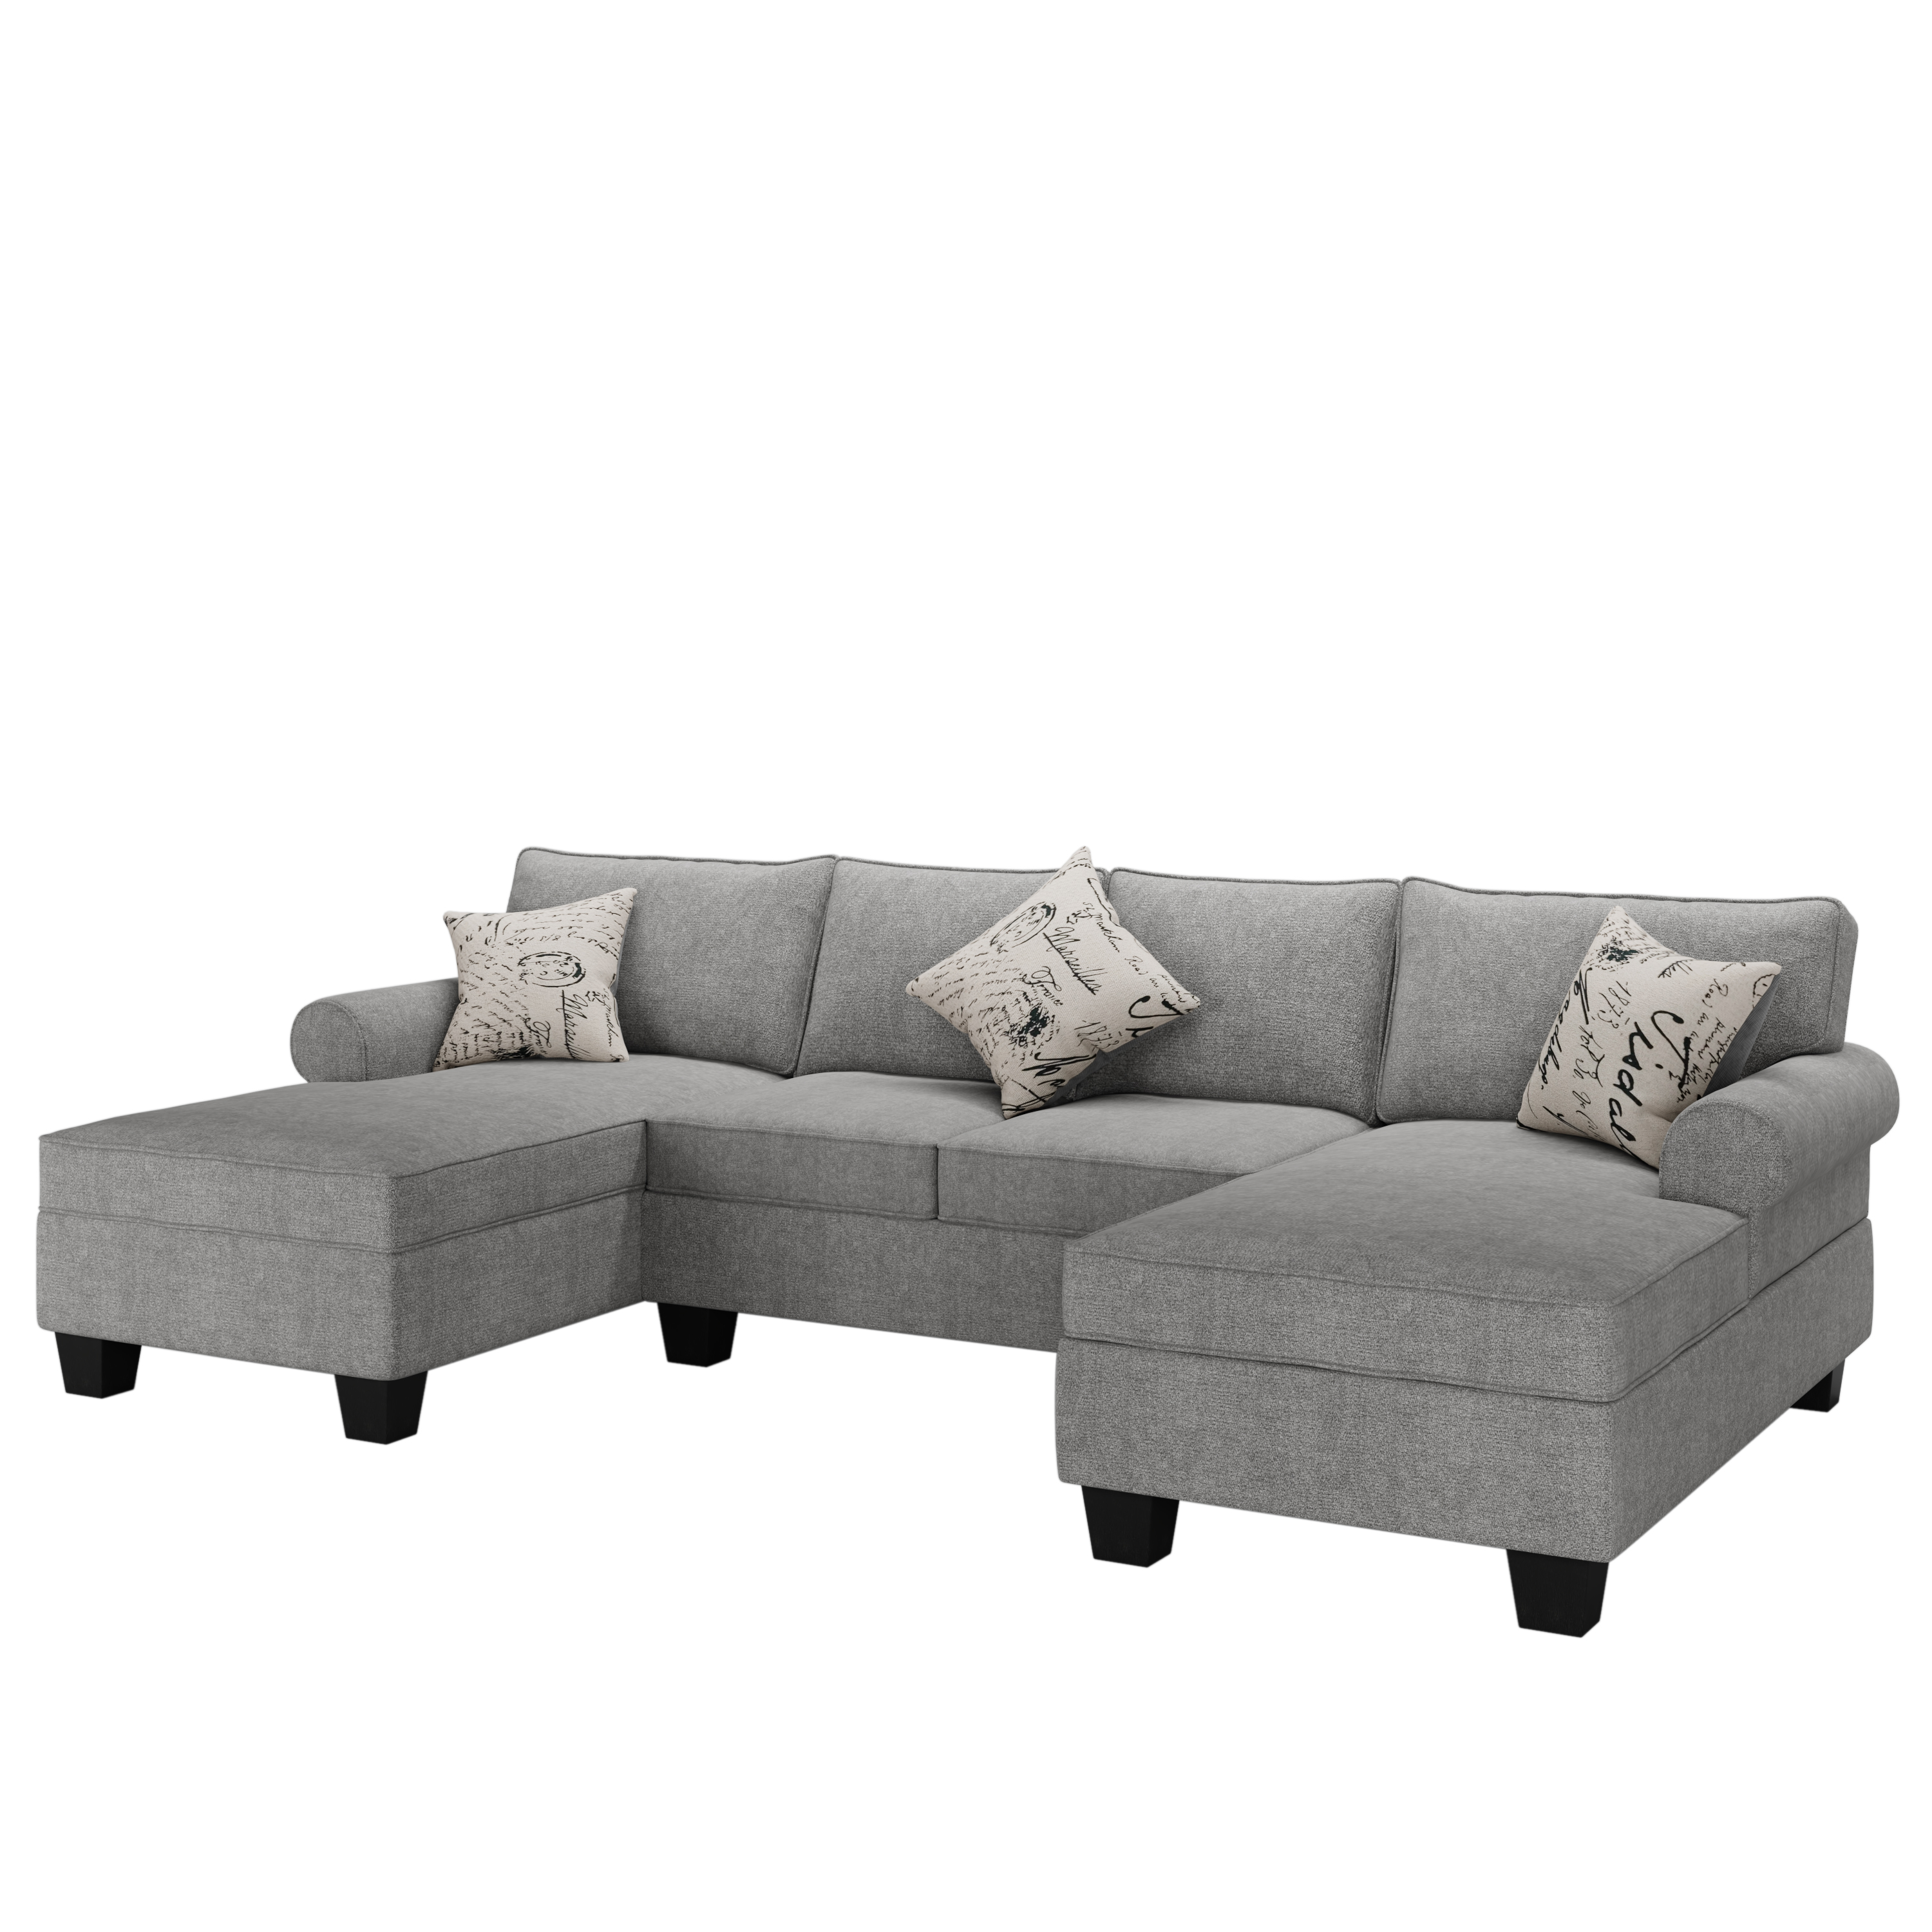 3pcs Chenille Sectional U Shaped Sofa with Double Chaises, Rolled Arm Sofa with storage Chaises, 3 pillows included,Grey